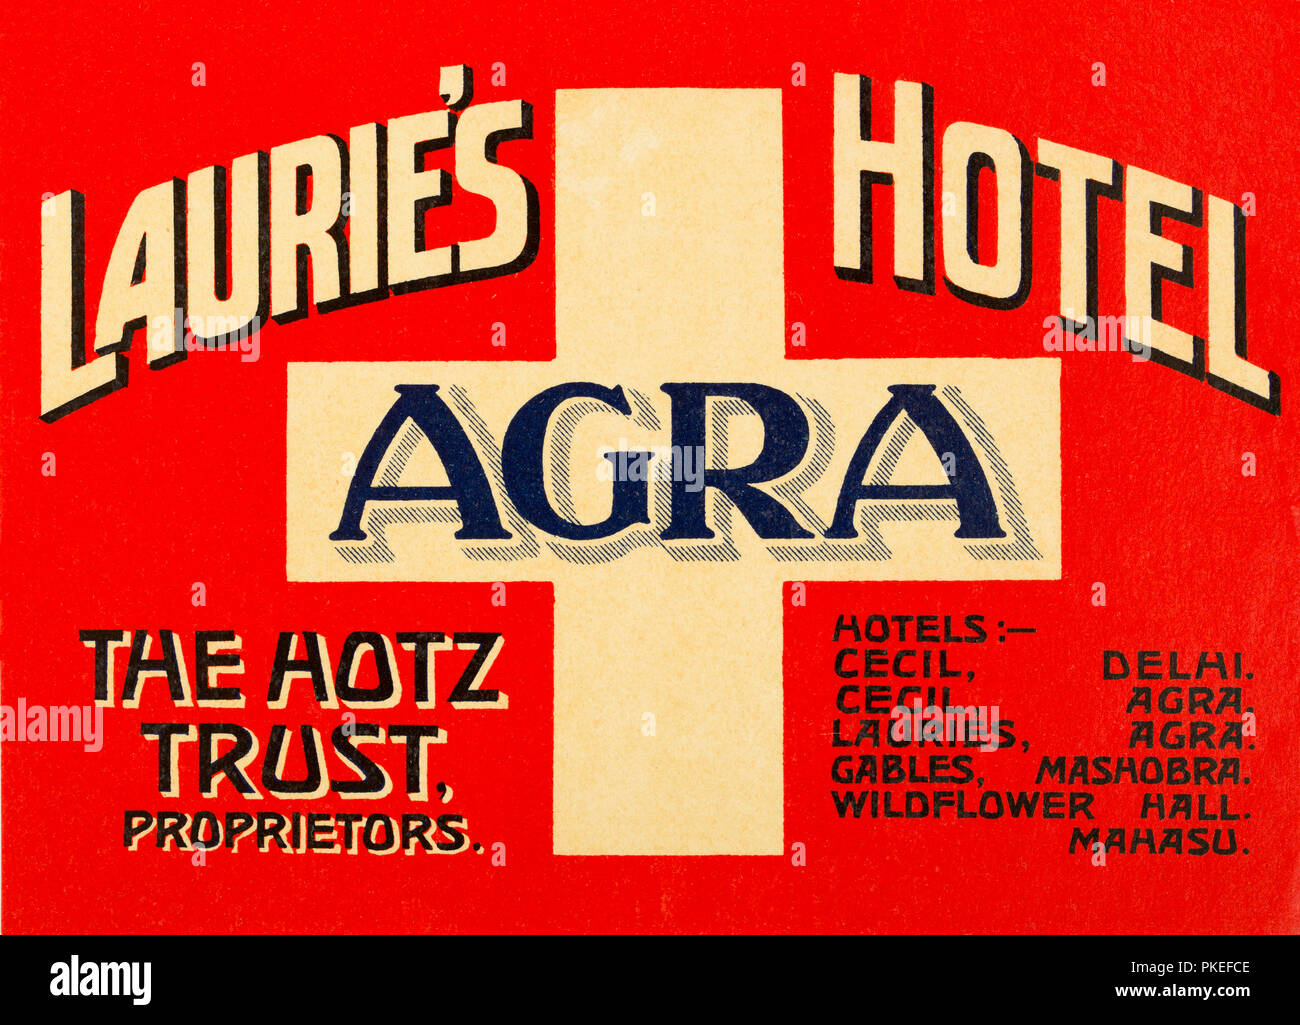 A vintage luggage label for Laurie's Hotel in Agra, India - The Hotz Trust, Proprietors - The equilateral cross and colors have their origins from the Stock Photo